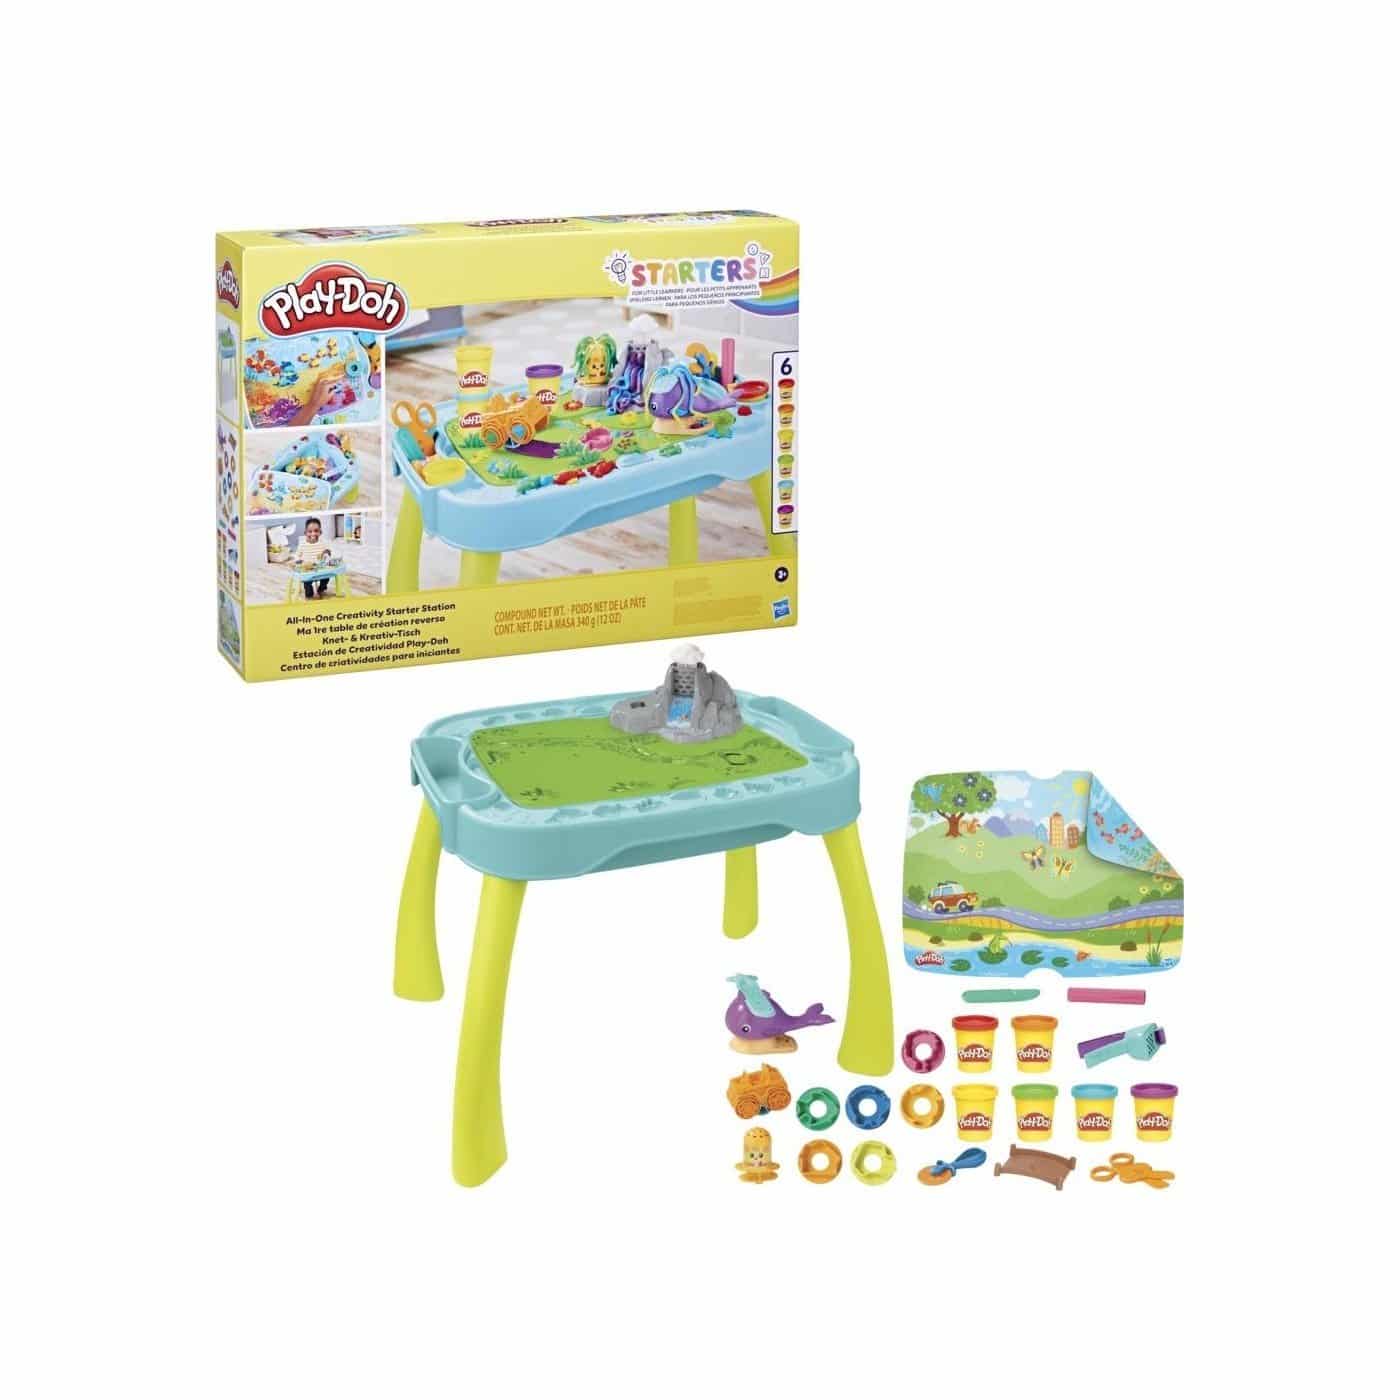 Hasbro All In One My First Table Play-Doh